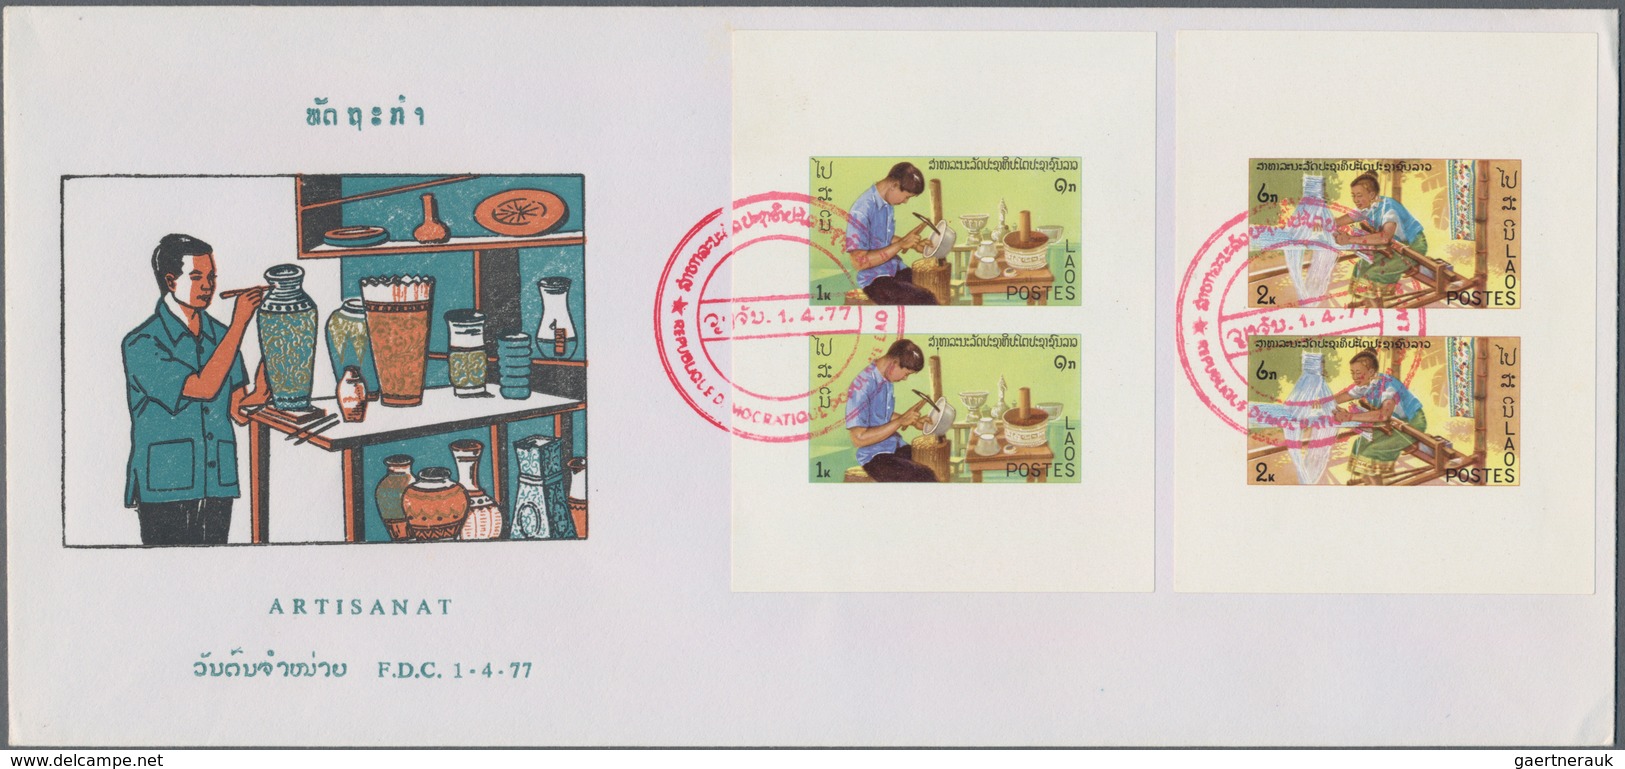 Laos: 1948/2001, holding of apprx. 228 covers incl. commercial and philatelic mail/f.d.c., many nice